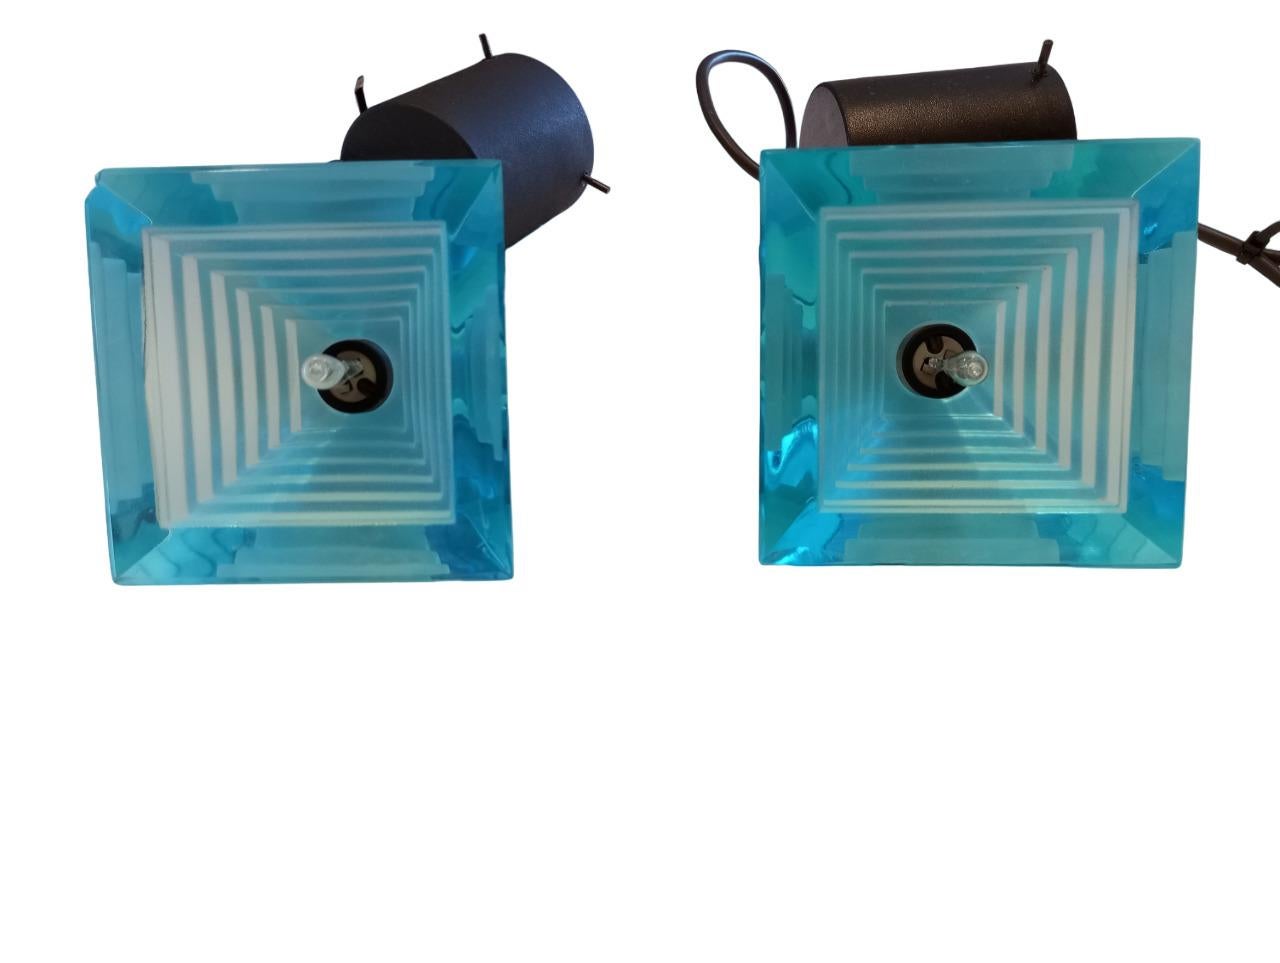 Pair of blue 'Pyramid' lamps designed by Paolo Piva for Mazzega  Murano glass  For Sale 4